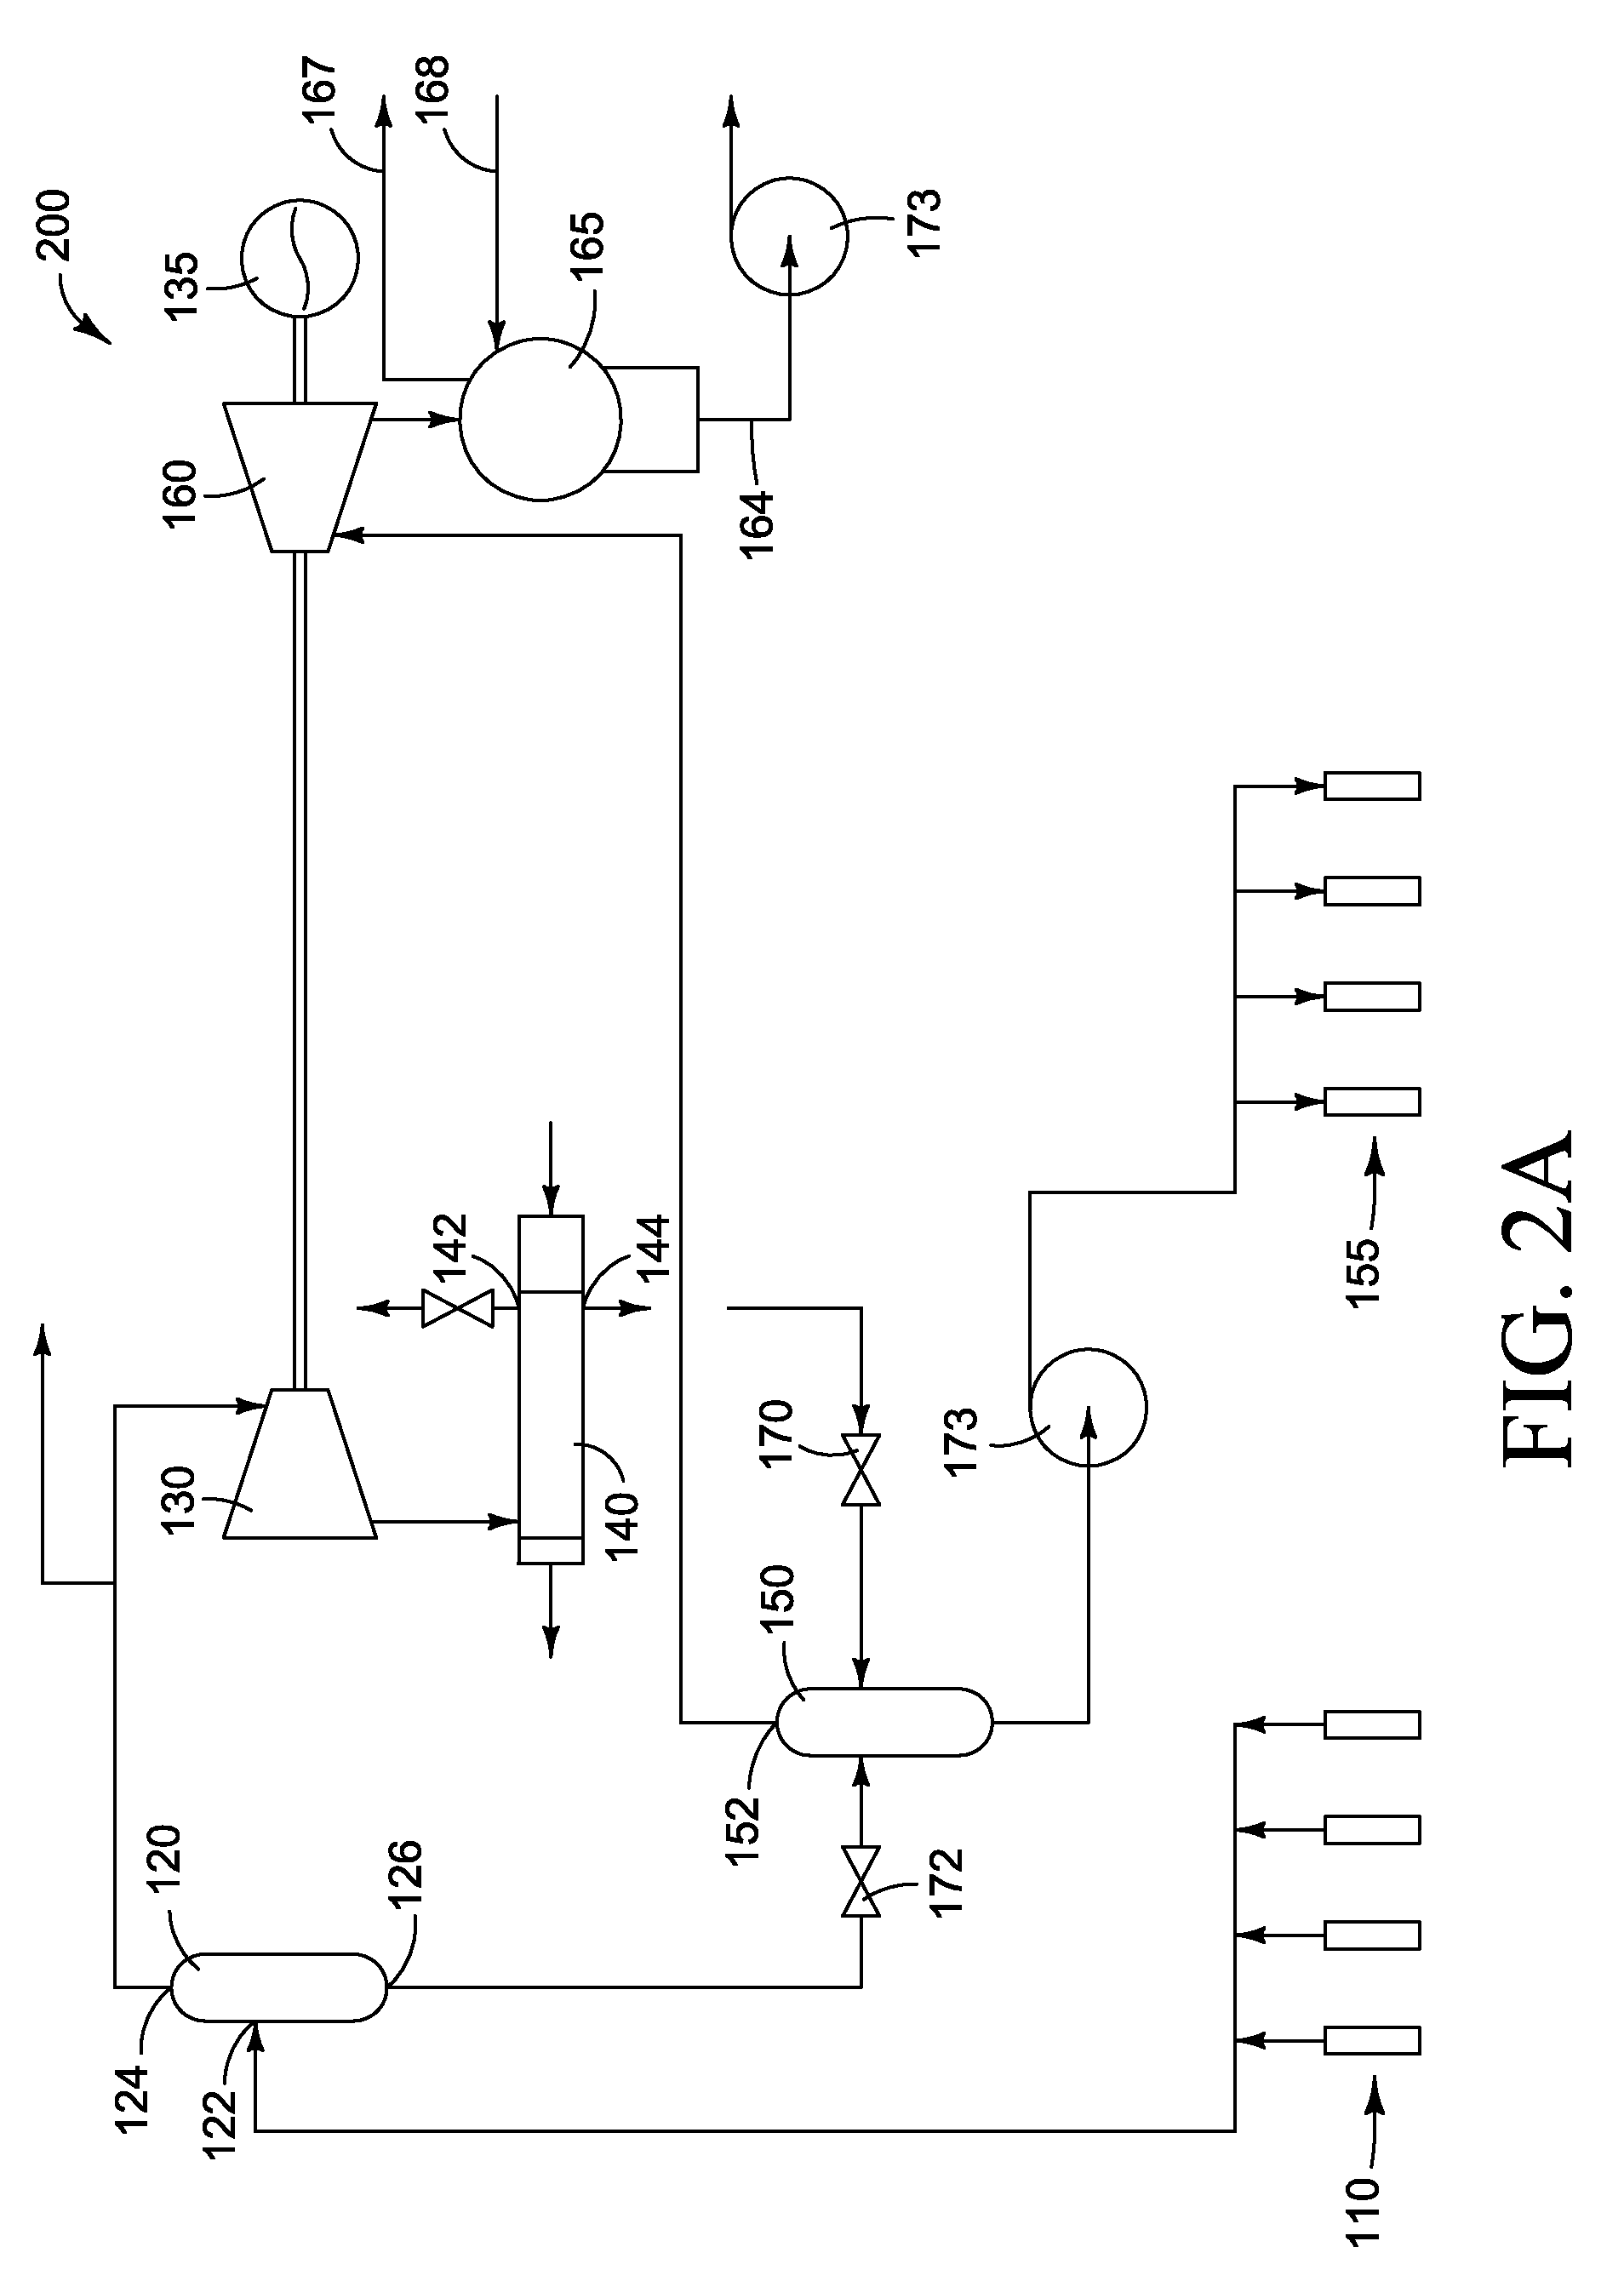 Geothermal power generation system and method of making power using the system